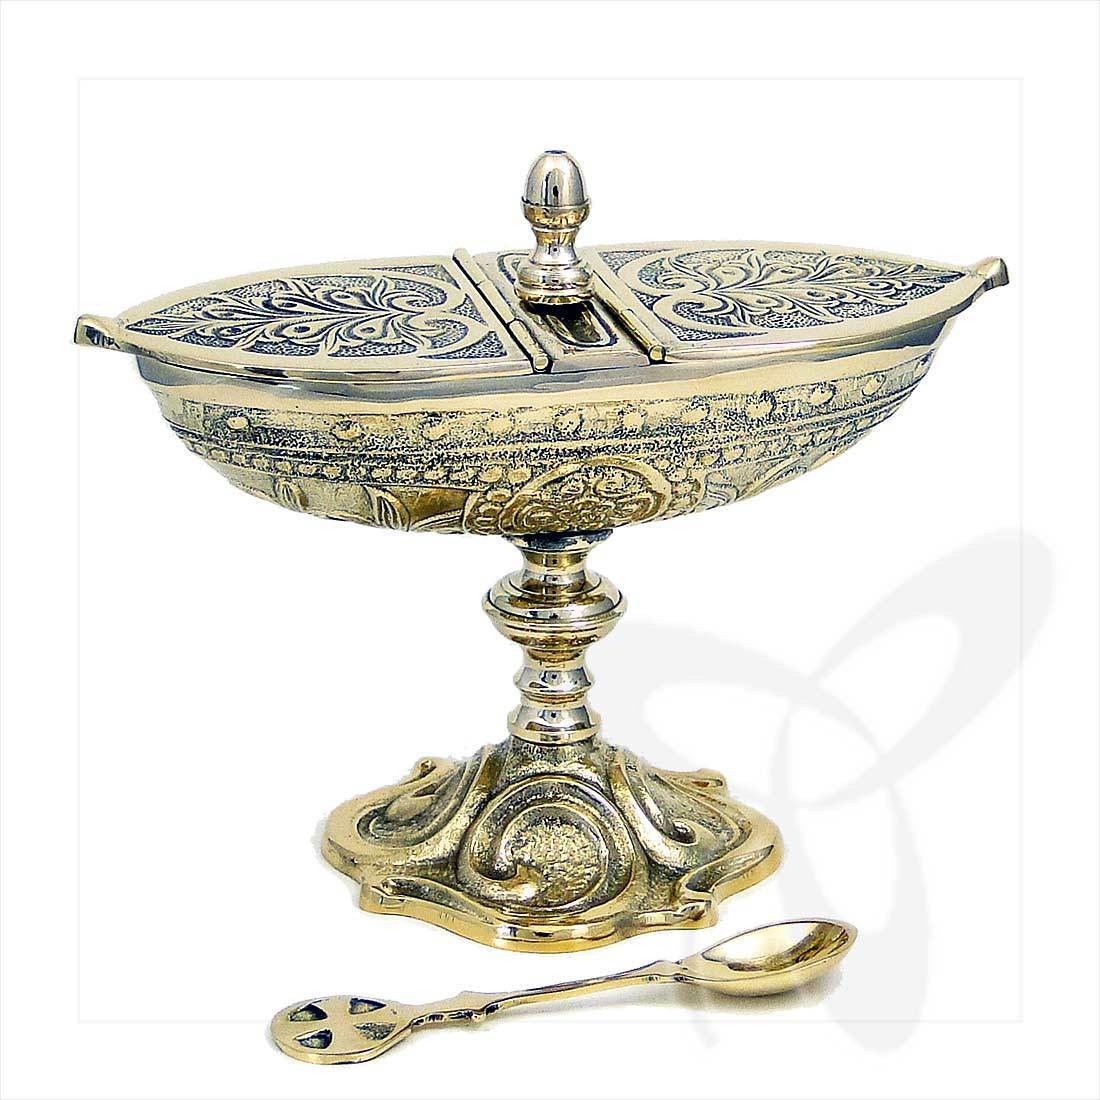 2943 incense boat with hinged lid and spoon, solid brass